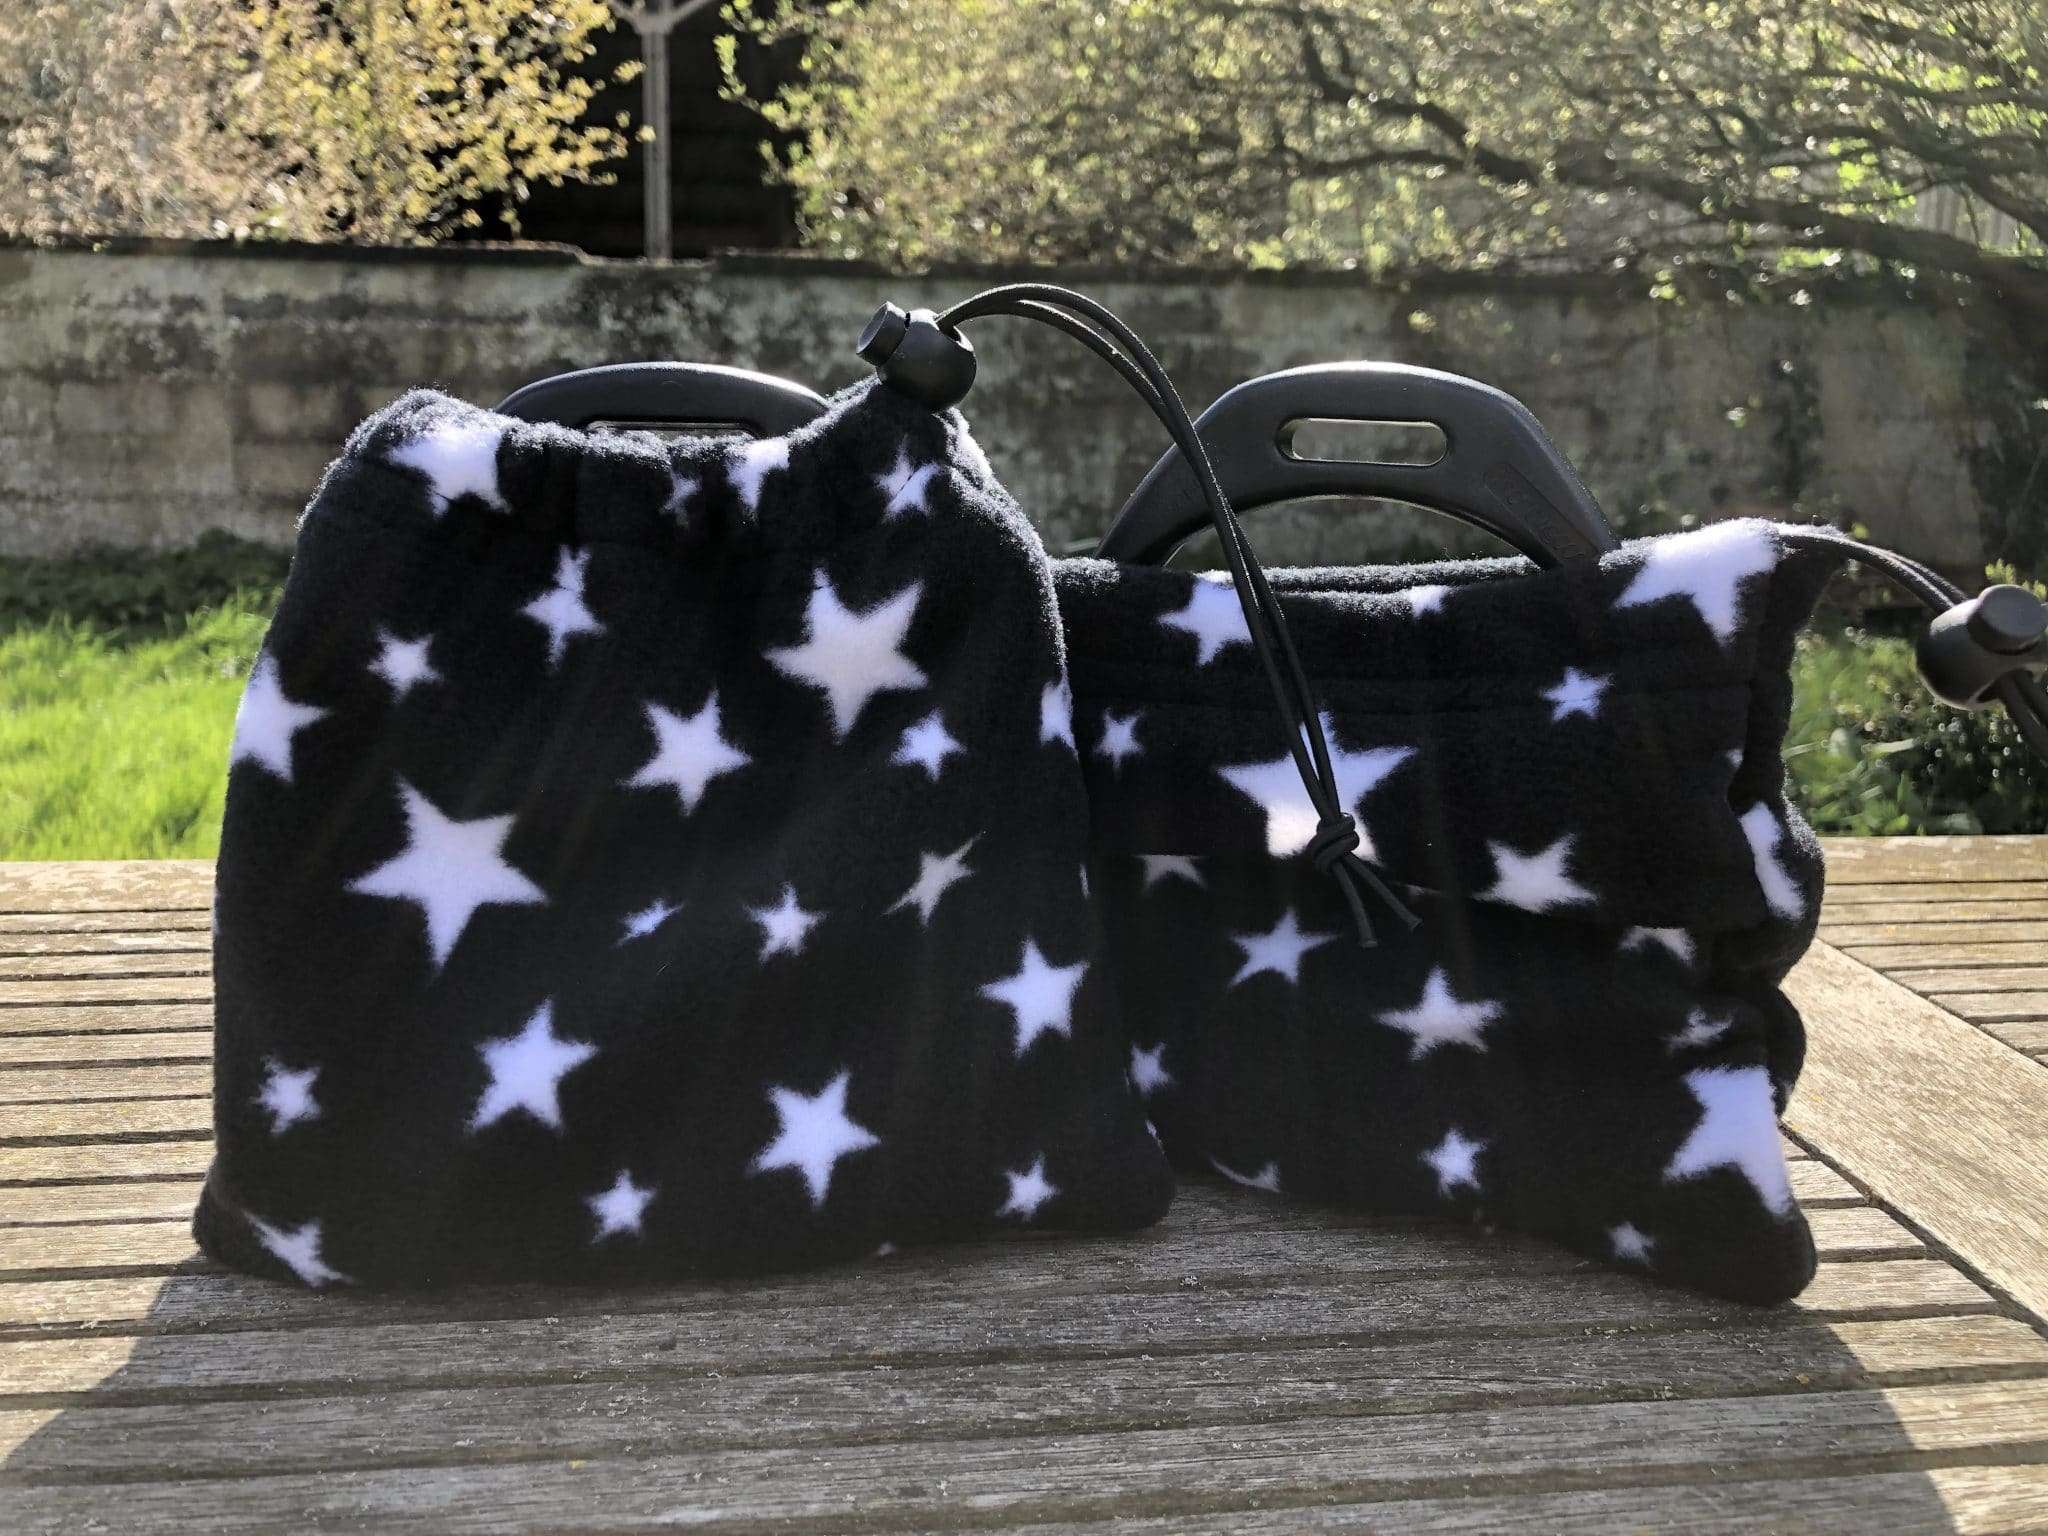 IMG 3870 scaled Fleece Stirrup Covers - Stars Help protect your saddle from dirt and scratches from the stirrups. Approx 7x7 inches Items posted within 1-3 working days. Shipped using Royal Mail 2nd Class. Back orders allow an extra 7 - 8 working days.